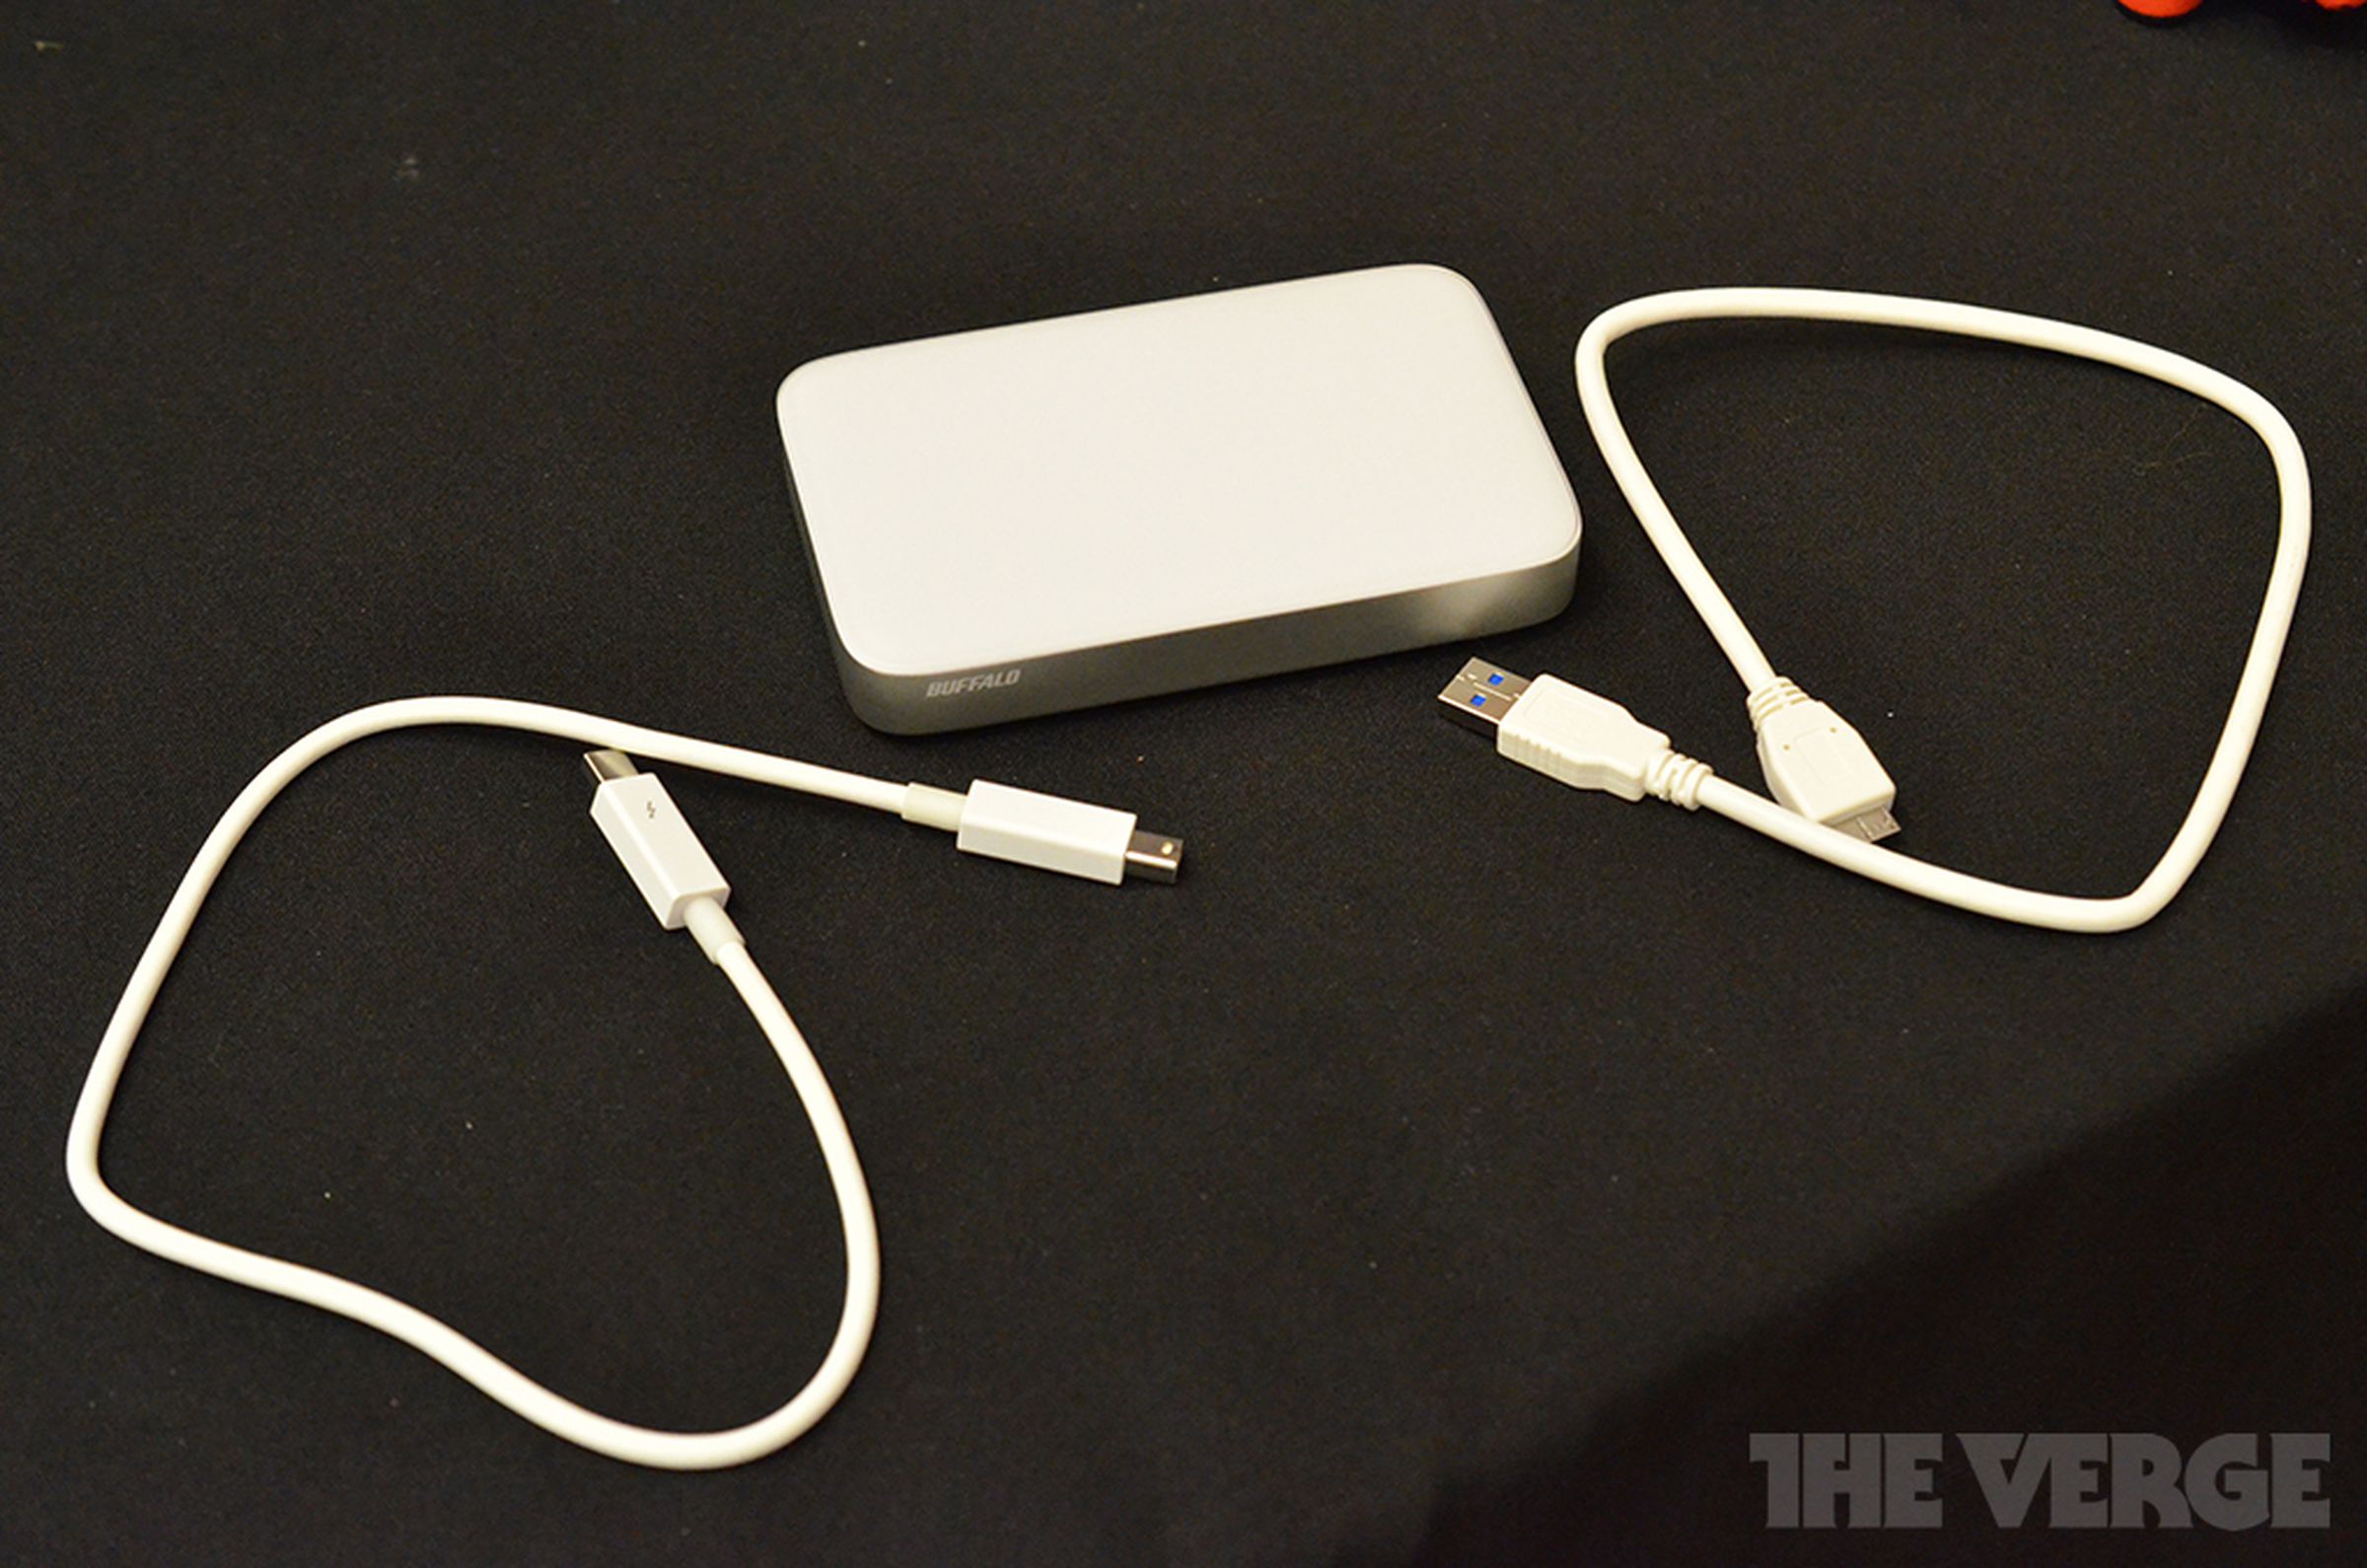 Buffalo MiniStation Thunderbolt hands-on pictures